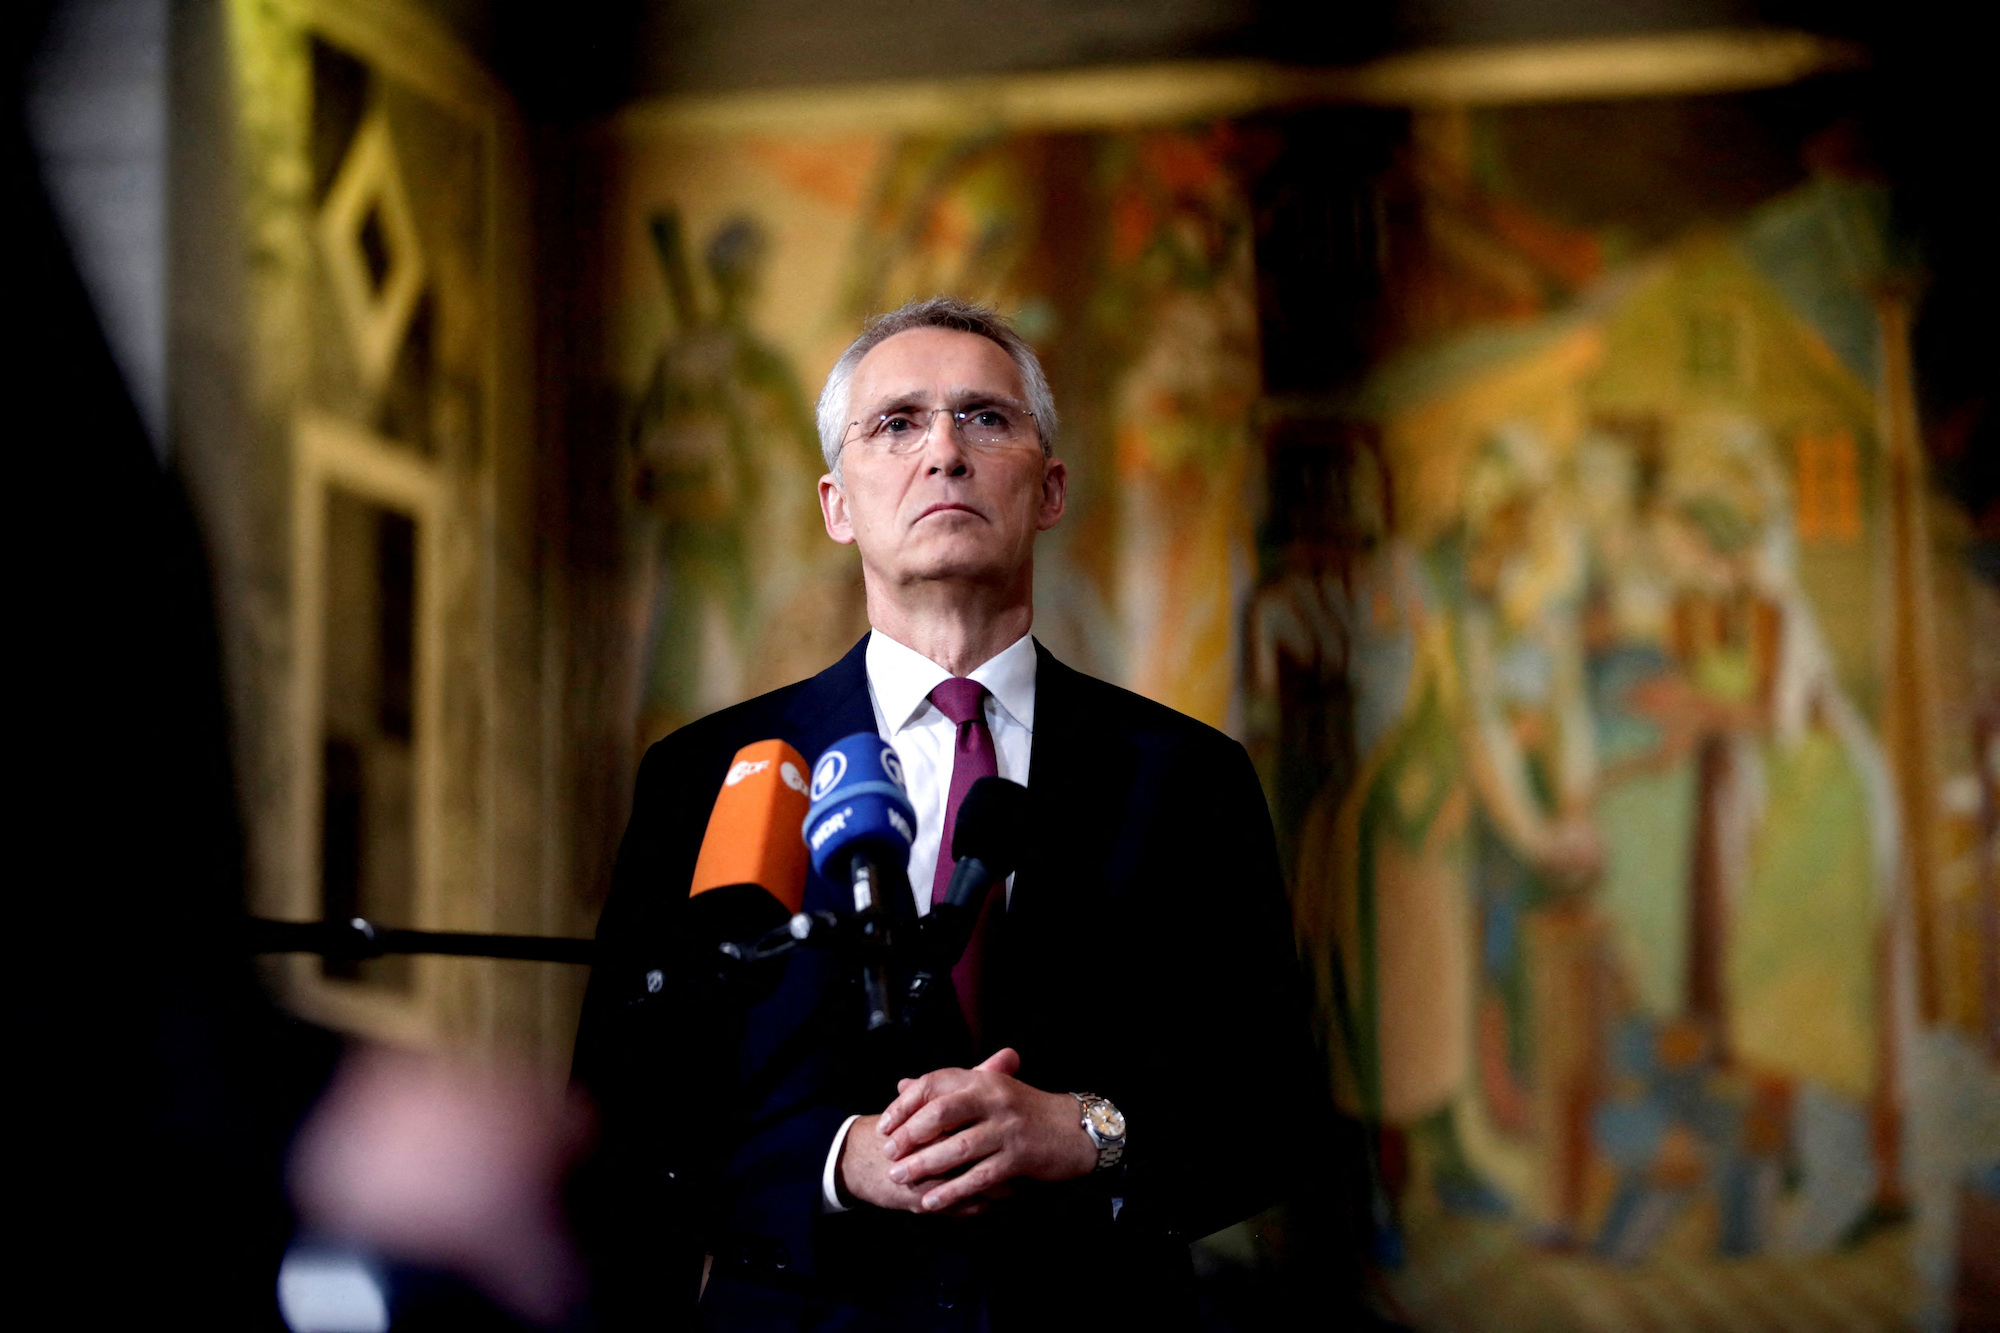 NATO Secretary General Jens Stoltenberg is seen at Oslo City Hall in Norway on Thursday.